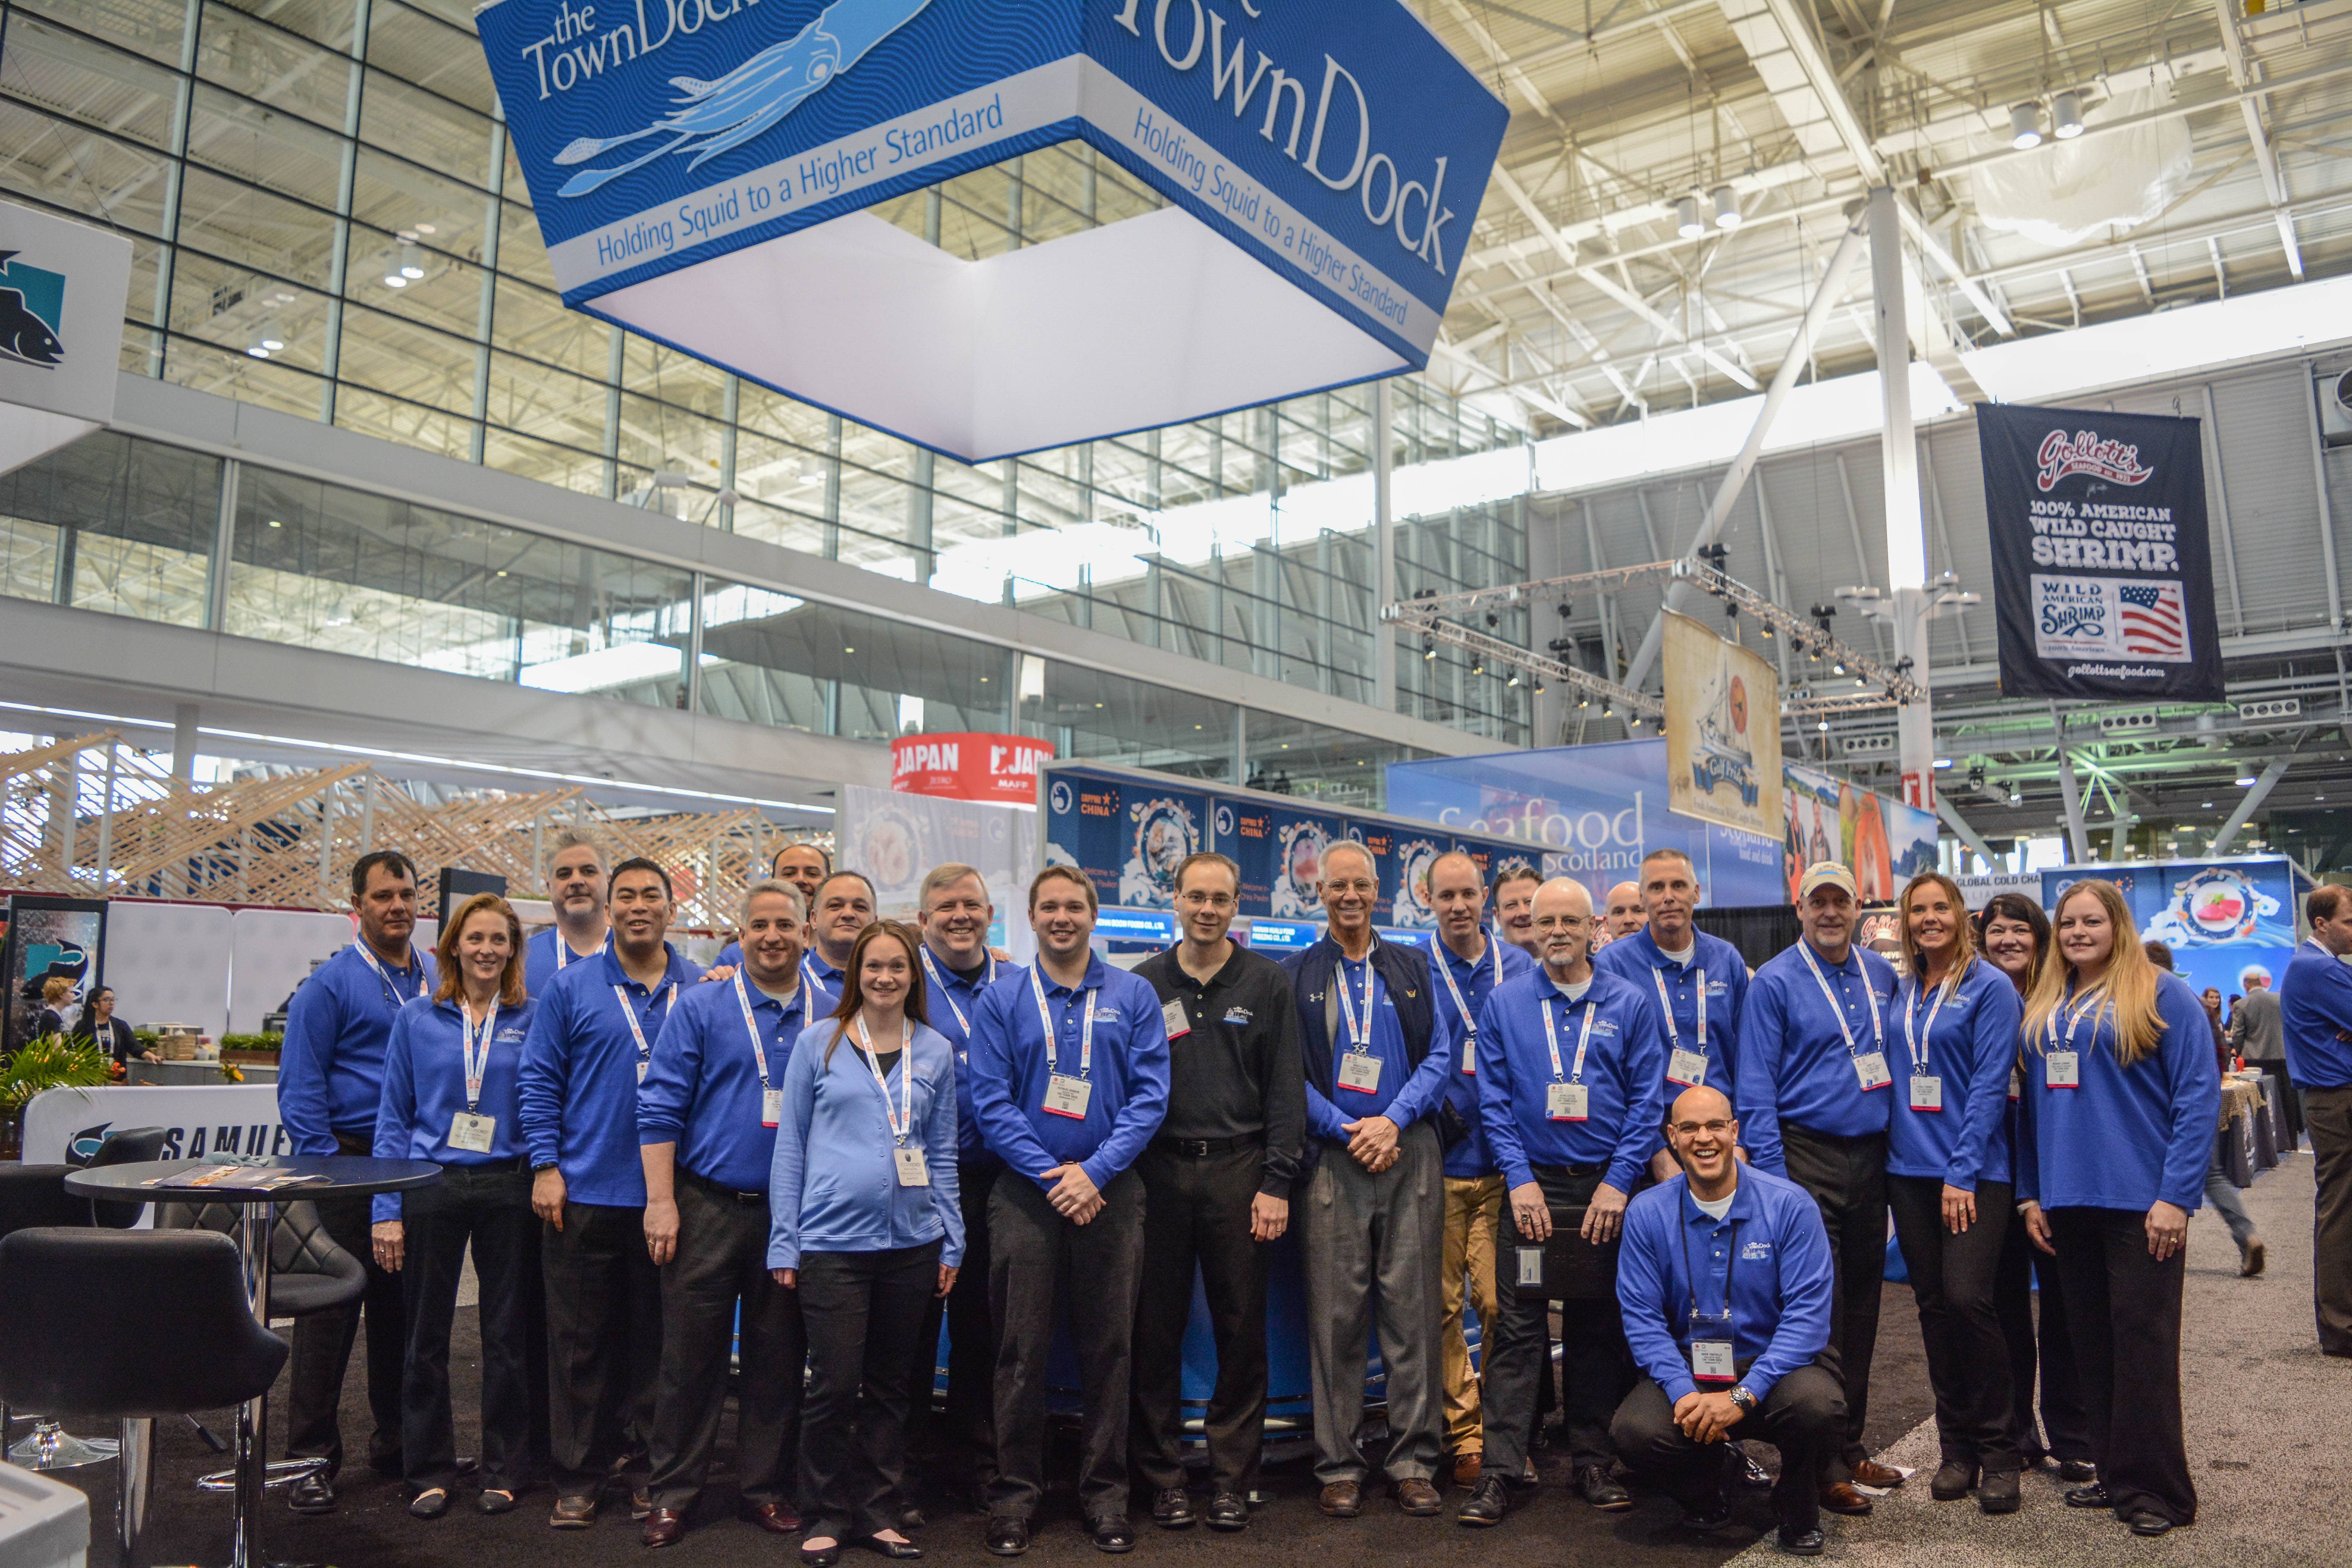 the town dock group staff picture at sena 2018